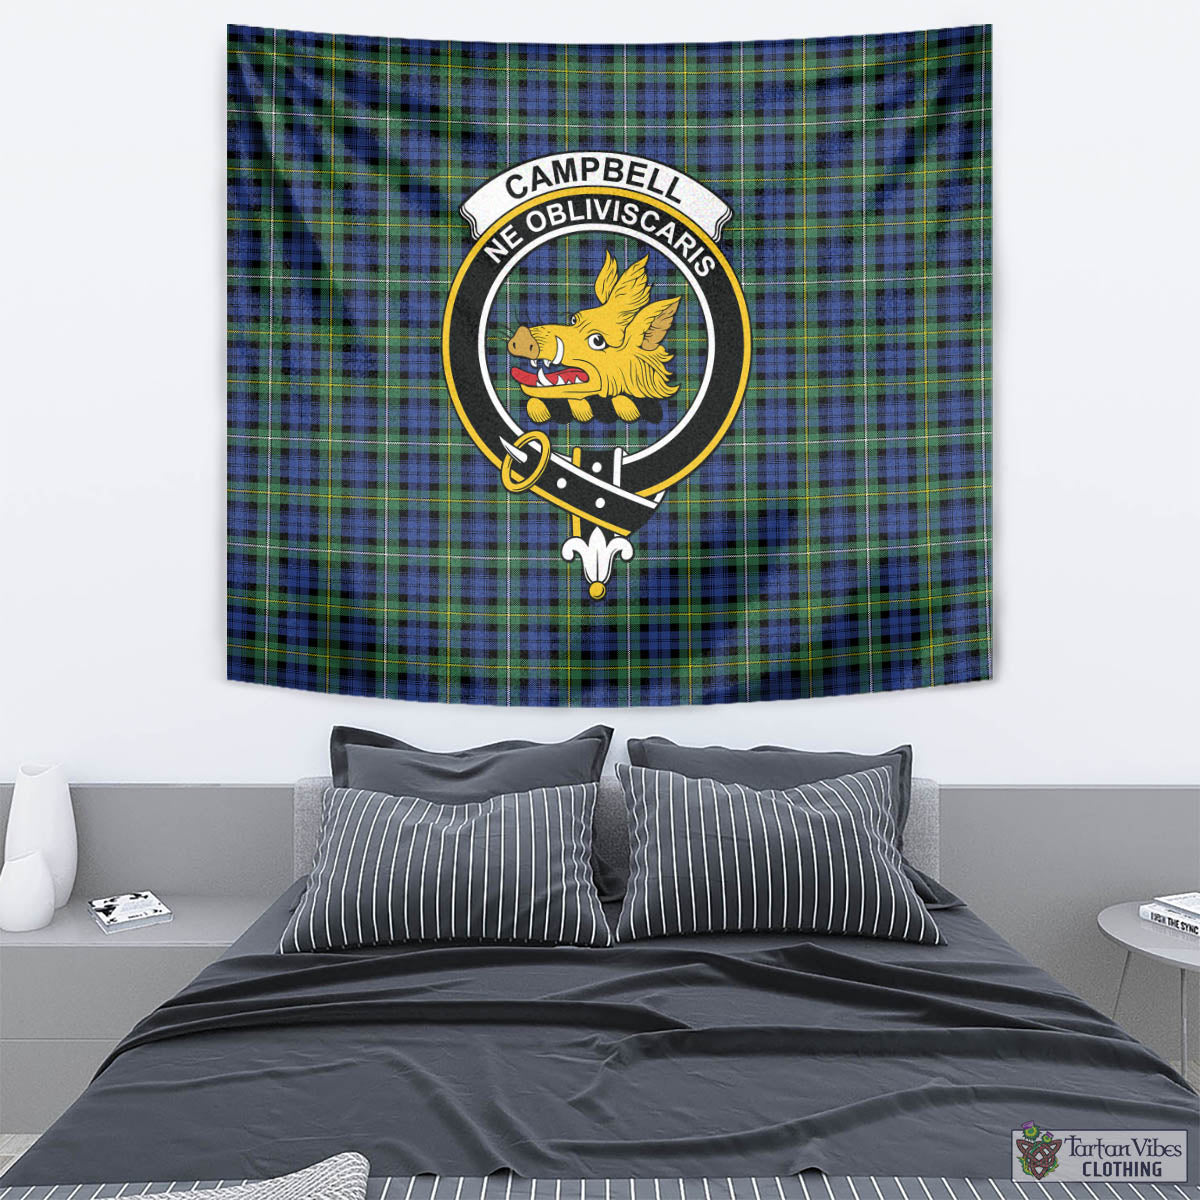 Tartan Vibes Clothing Campbell Argyll Ancient Tartan Tapestry Wall Hanging and Home Decor for Room with Family Crest